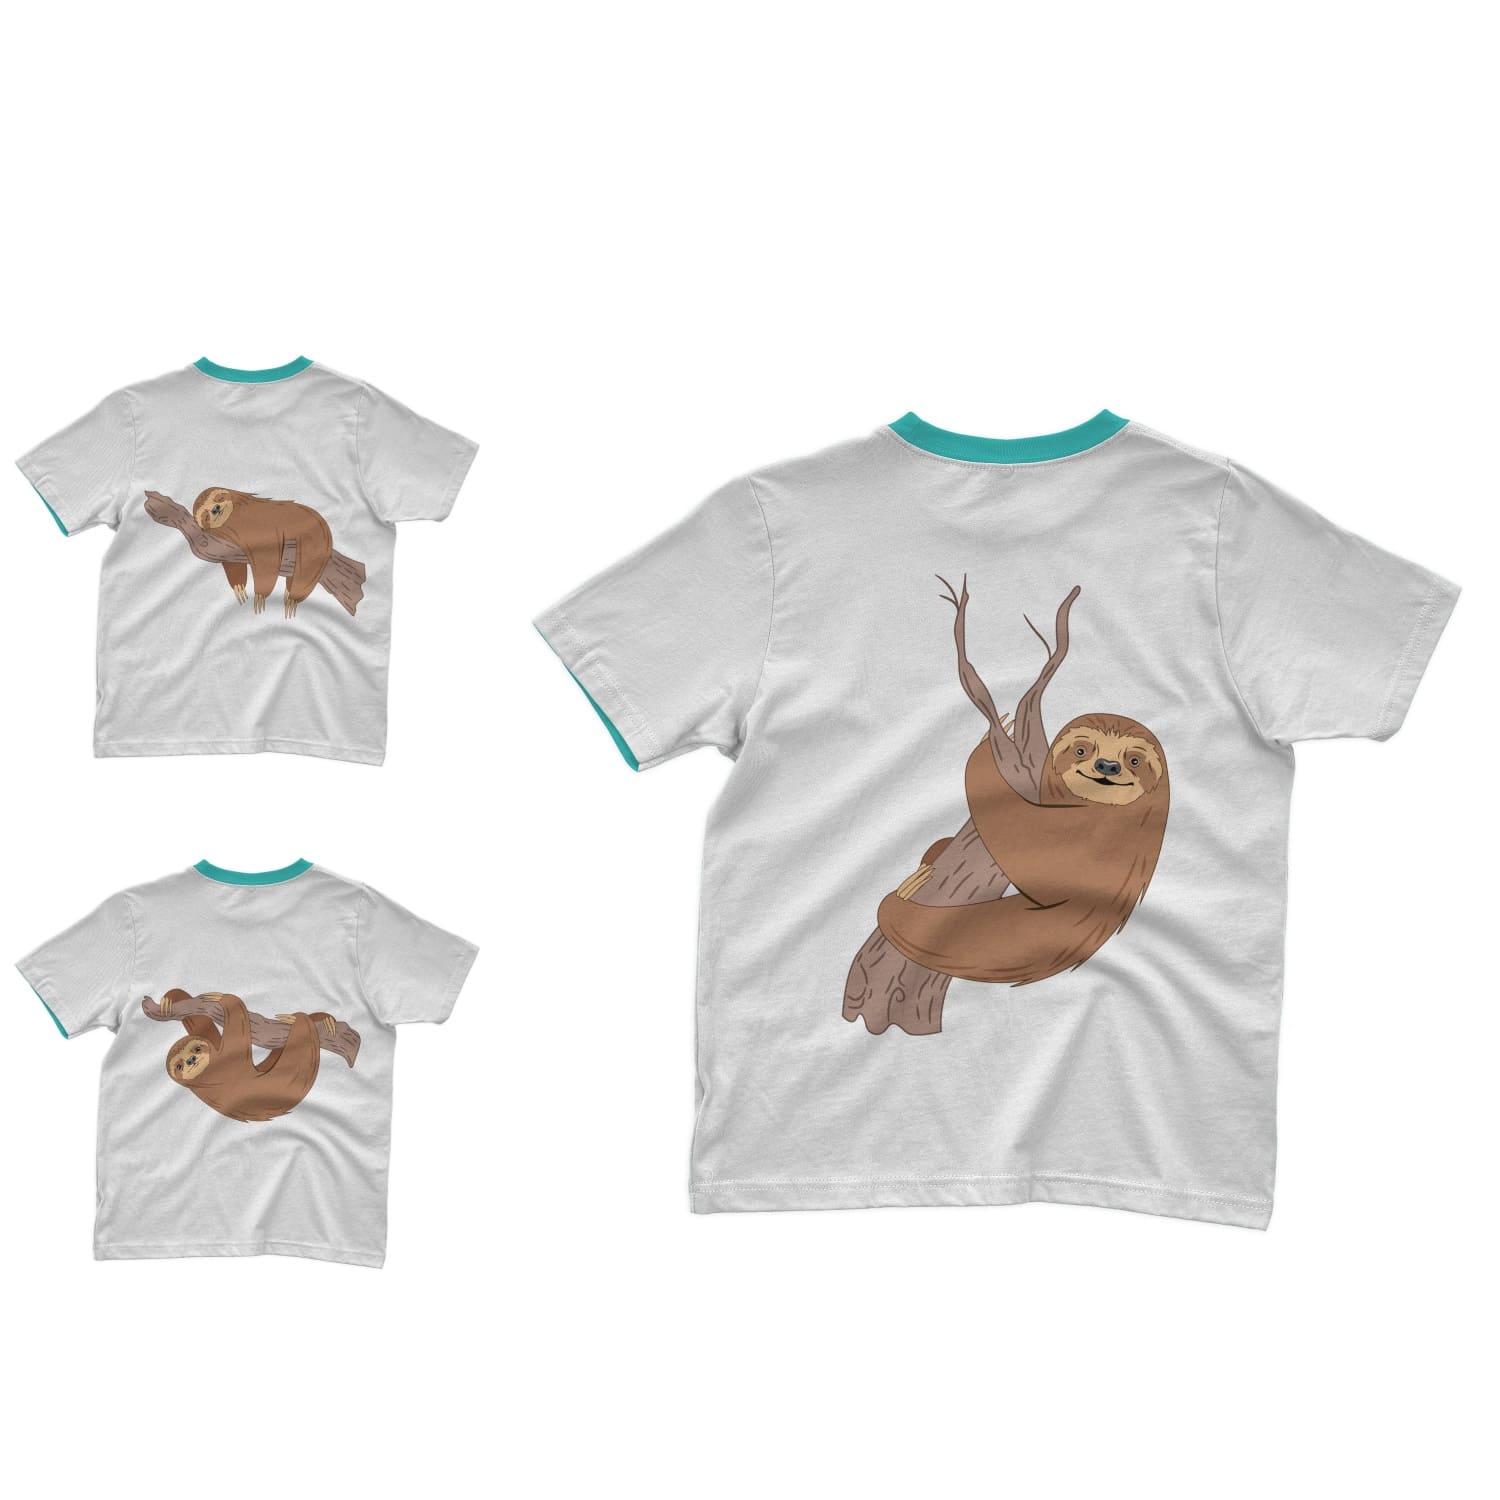 Three t-shirts with images of sloths and their everyday life.